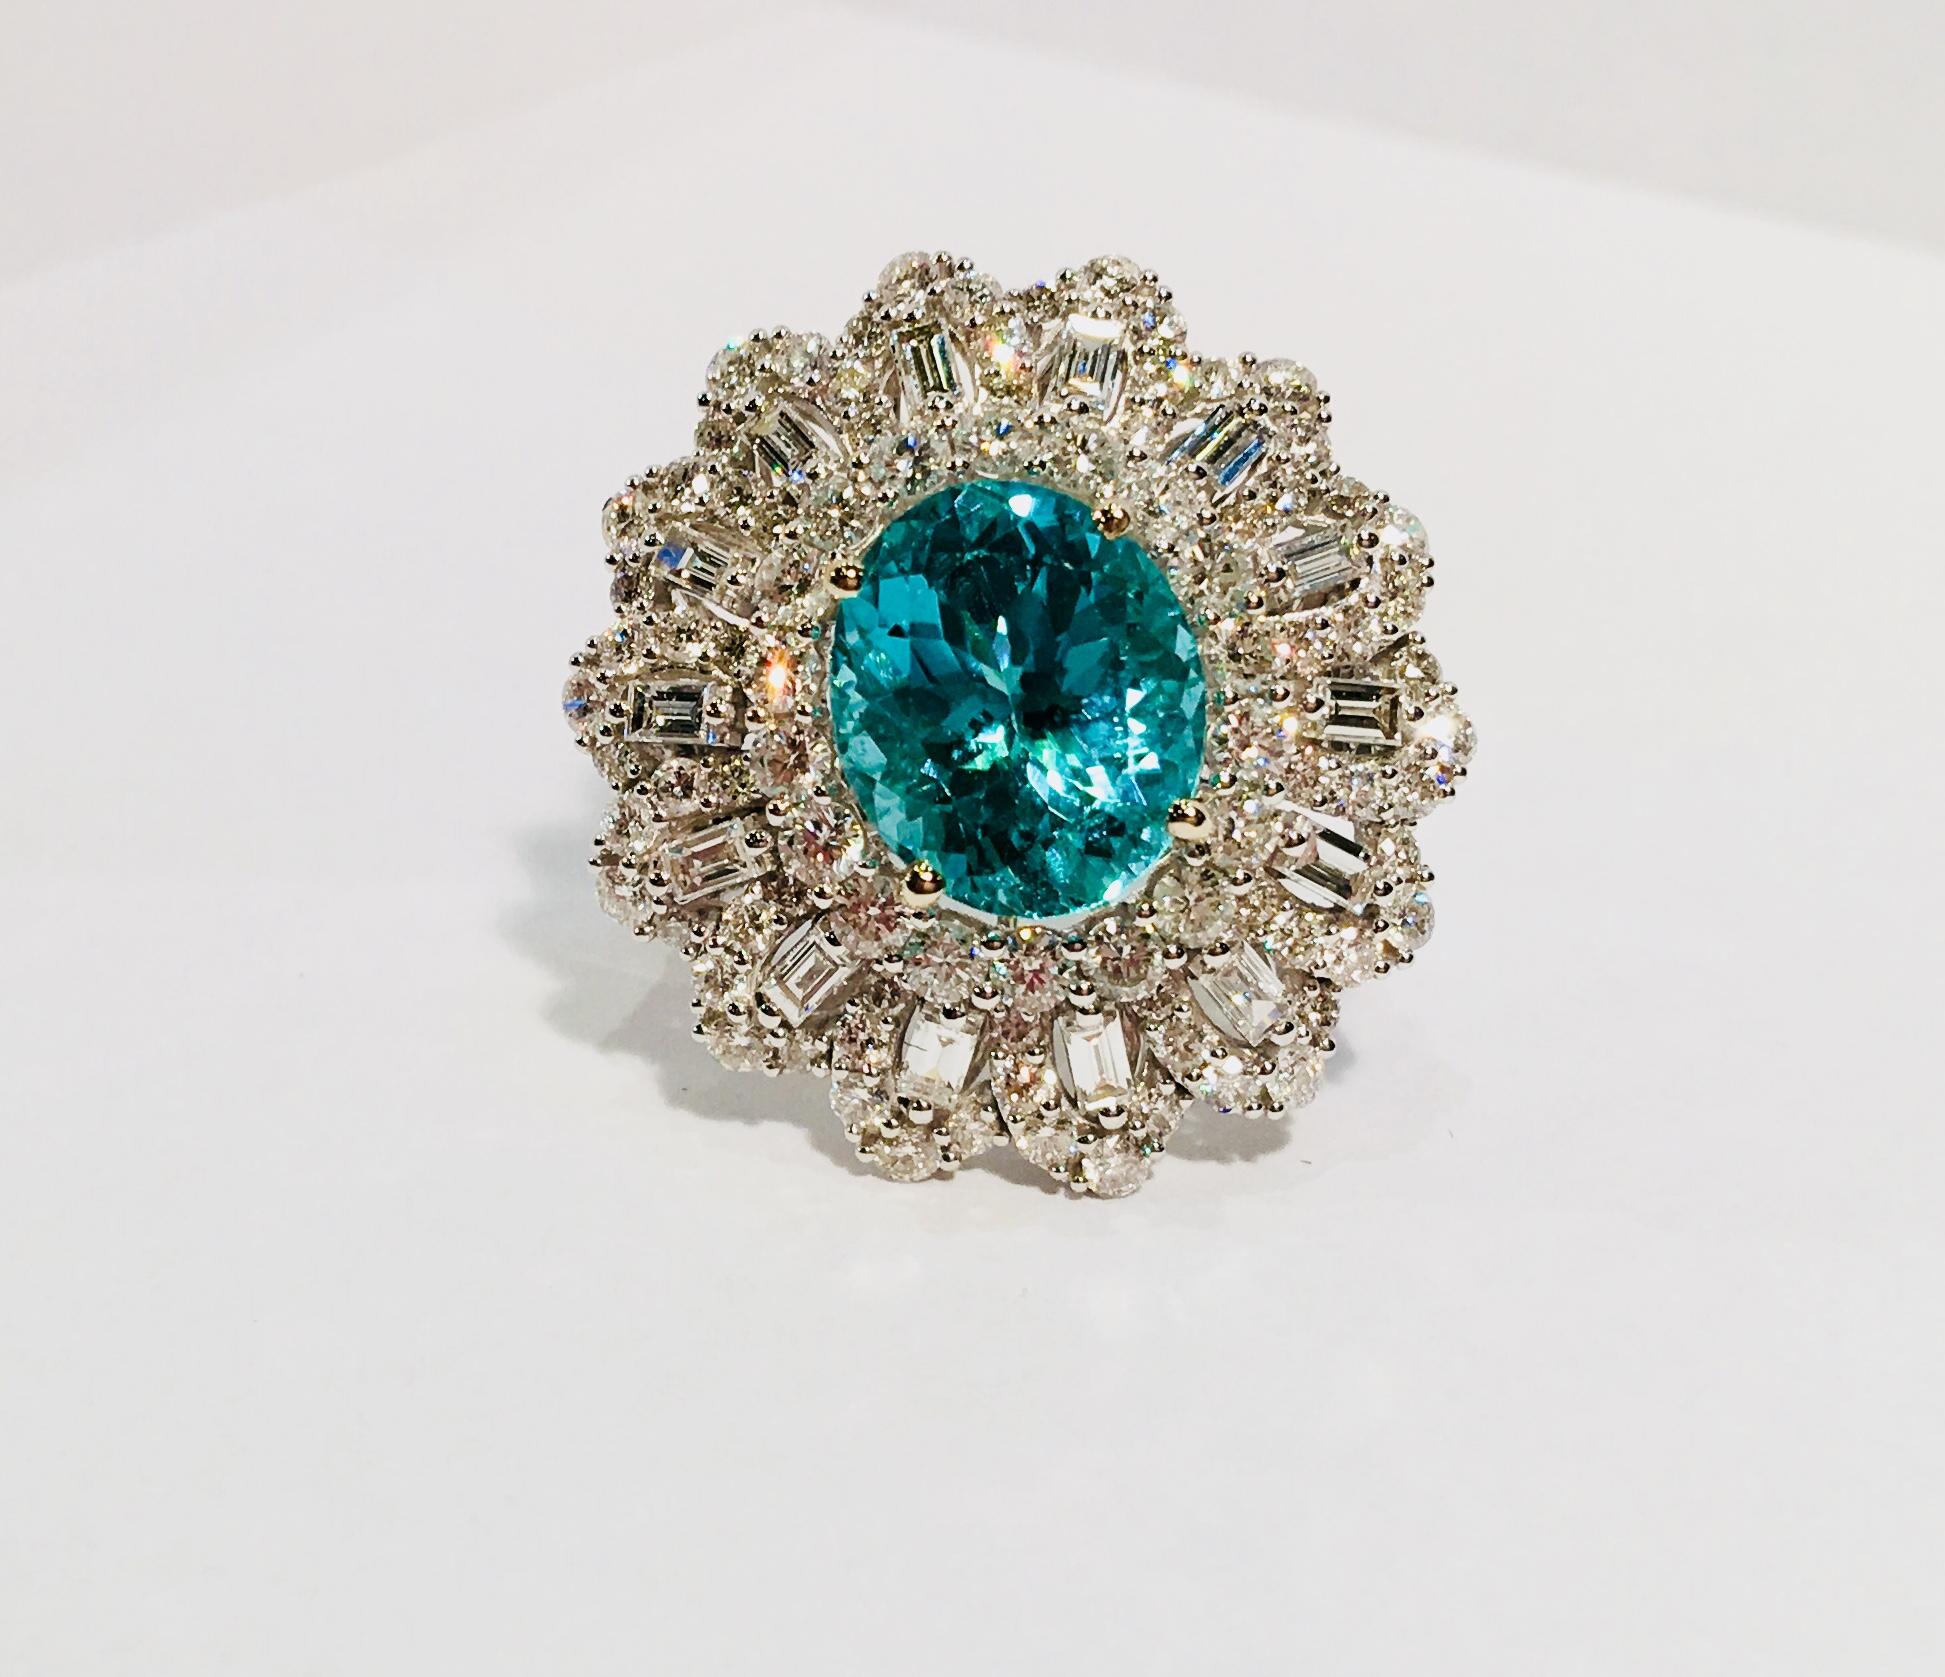 Captivating, transparent greenish blue modified brilliant oval cut Paraiba tourmaline has been certified by GIA, report number 1192430663. The stone measures 11.89 mm x 10.30 mm, with an estimated depth of 6.67 mm. Paraiba weighs 5.02 carats. The